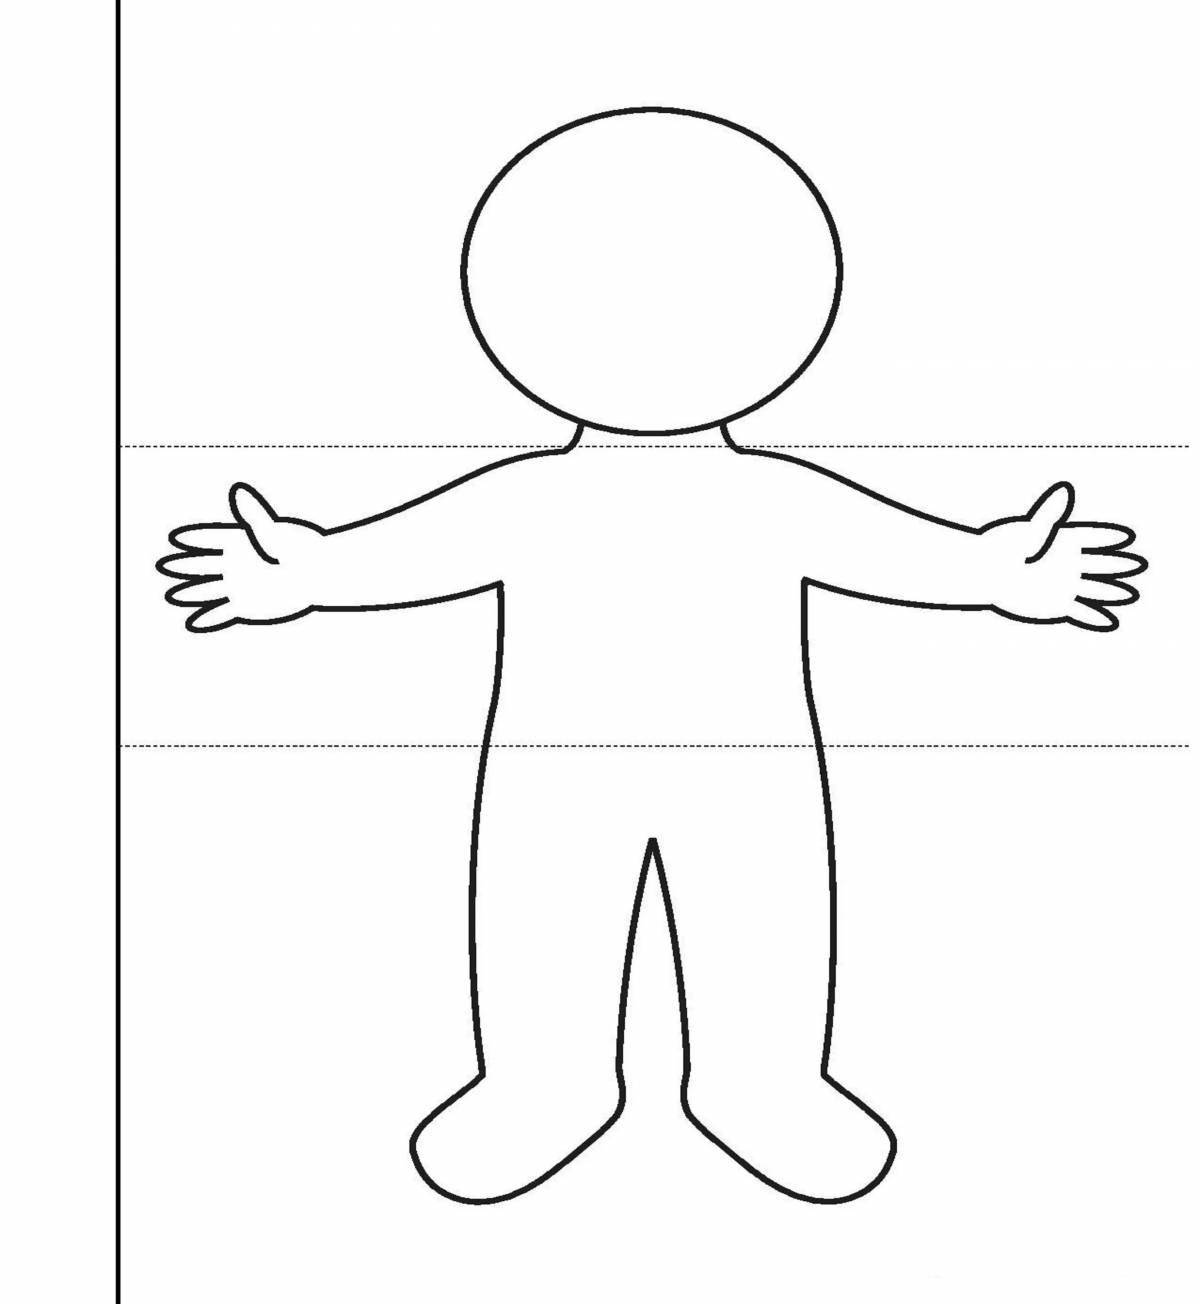 Joyful human figure coloring pages for kids